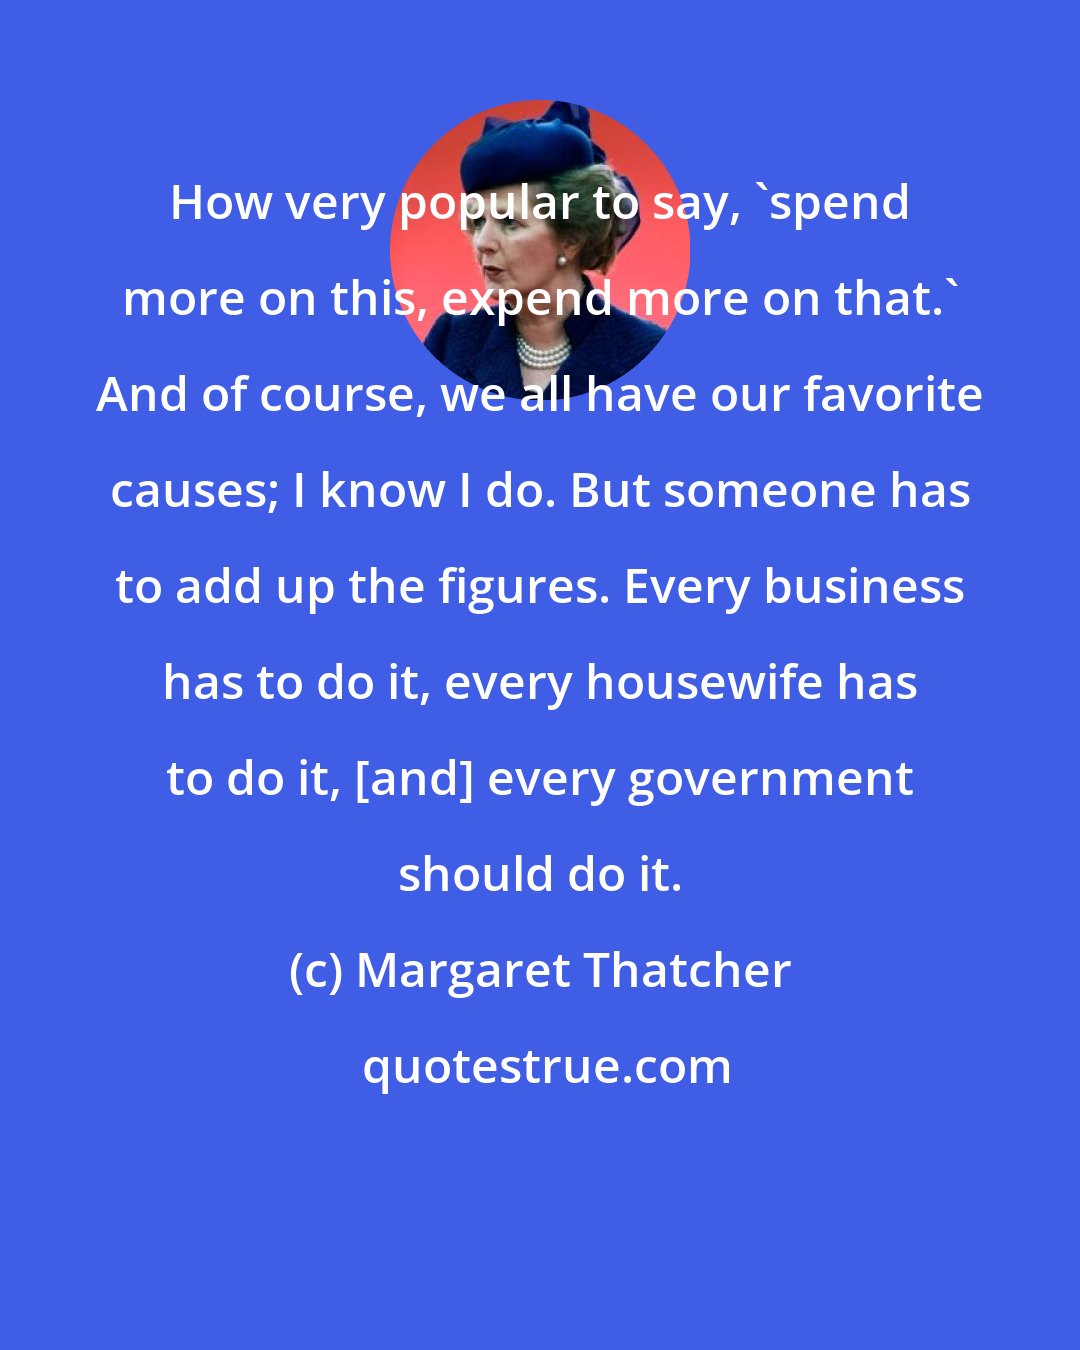 Margaret Thatcher: How very popular to say, 'spend more on this, expend more on that.' And of course, we all have our favorite causes; I know I do. But someone has to add up the figures. Every business has to do it, every housewife has to do it, [and] every government should do it.